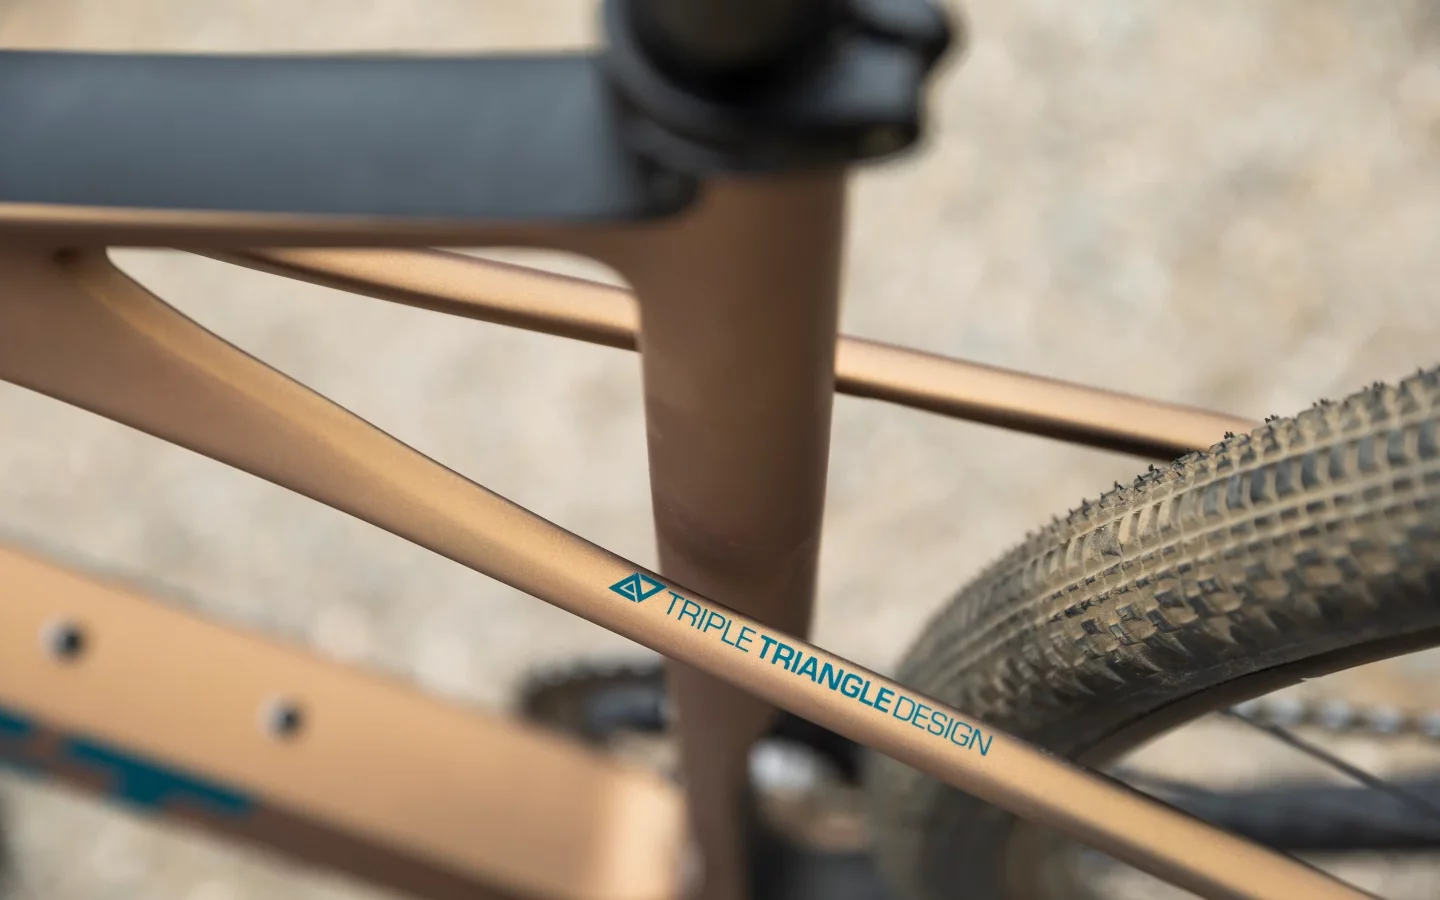 Floating Stays a Triple Triangle | Gravel Travel